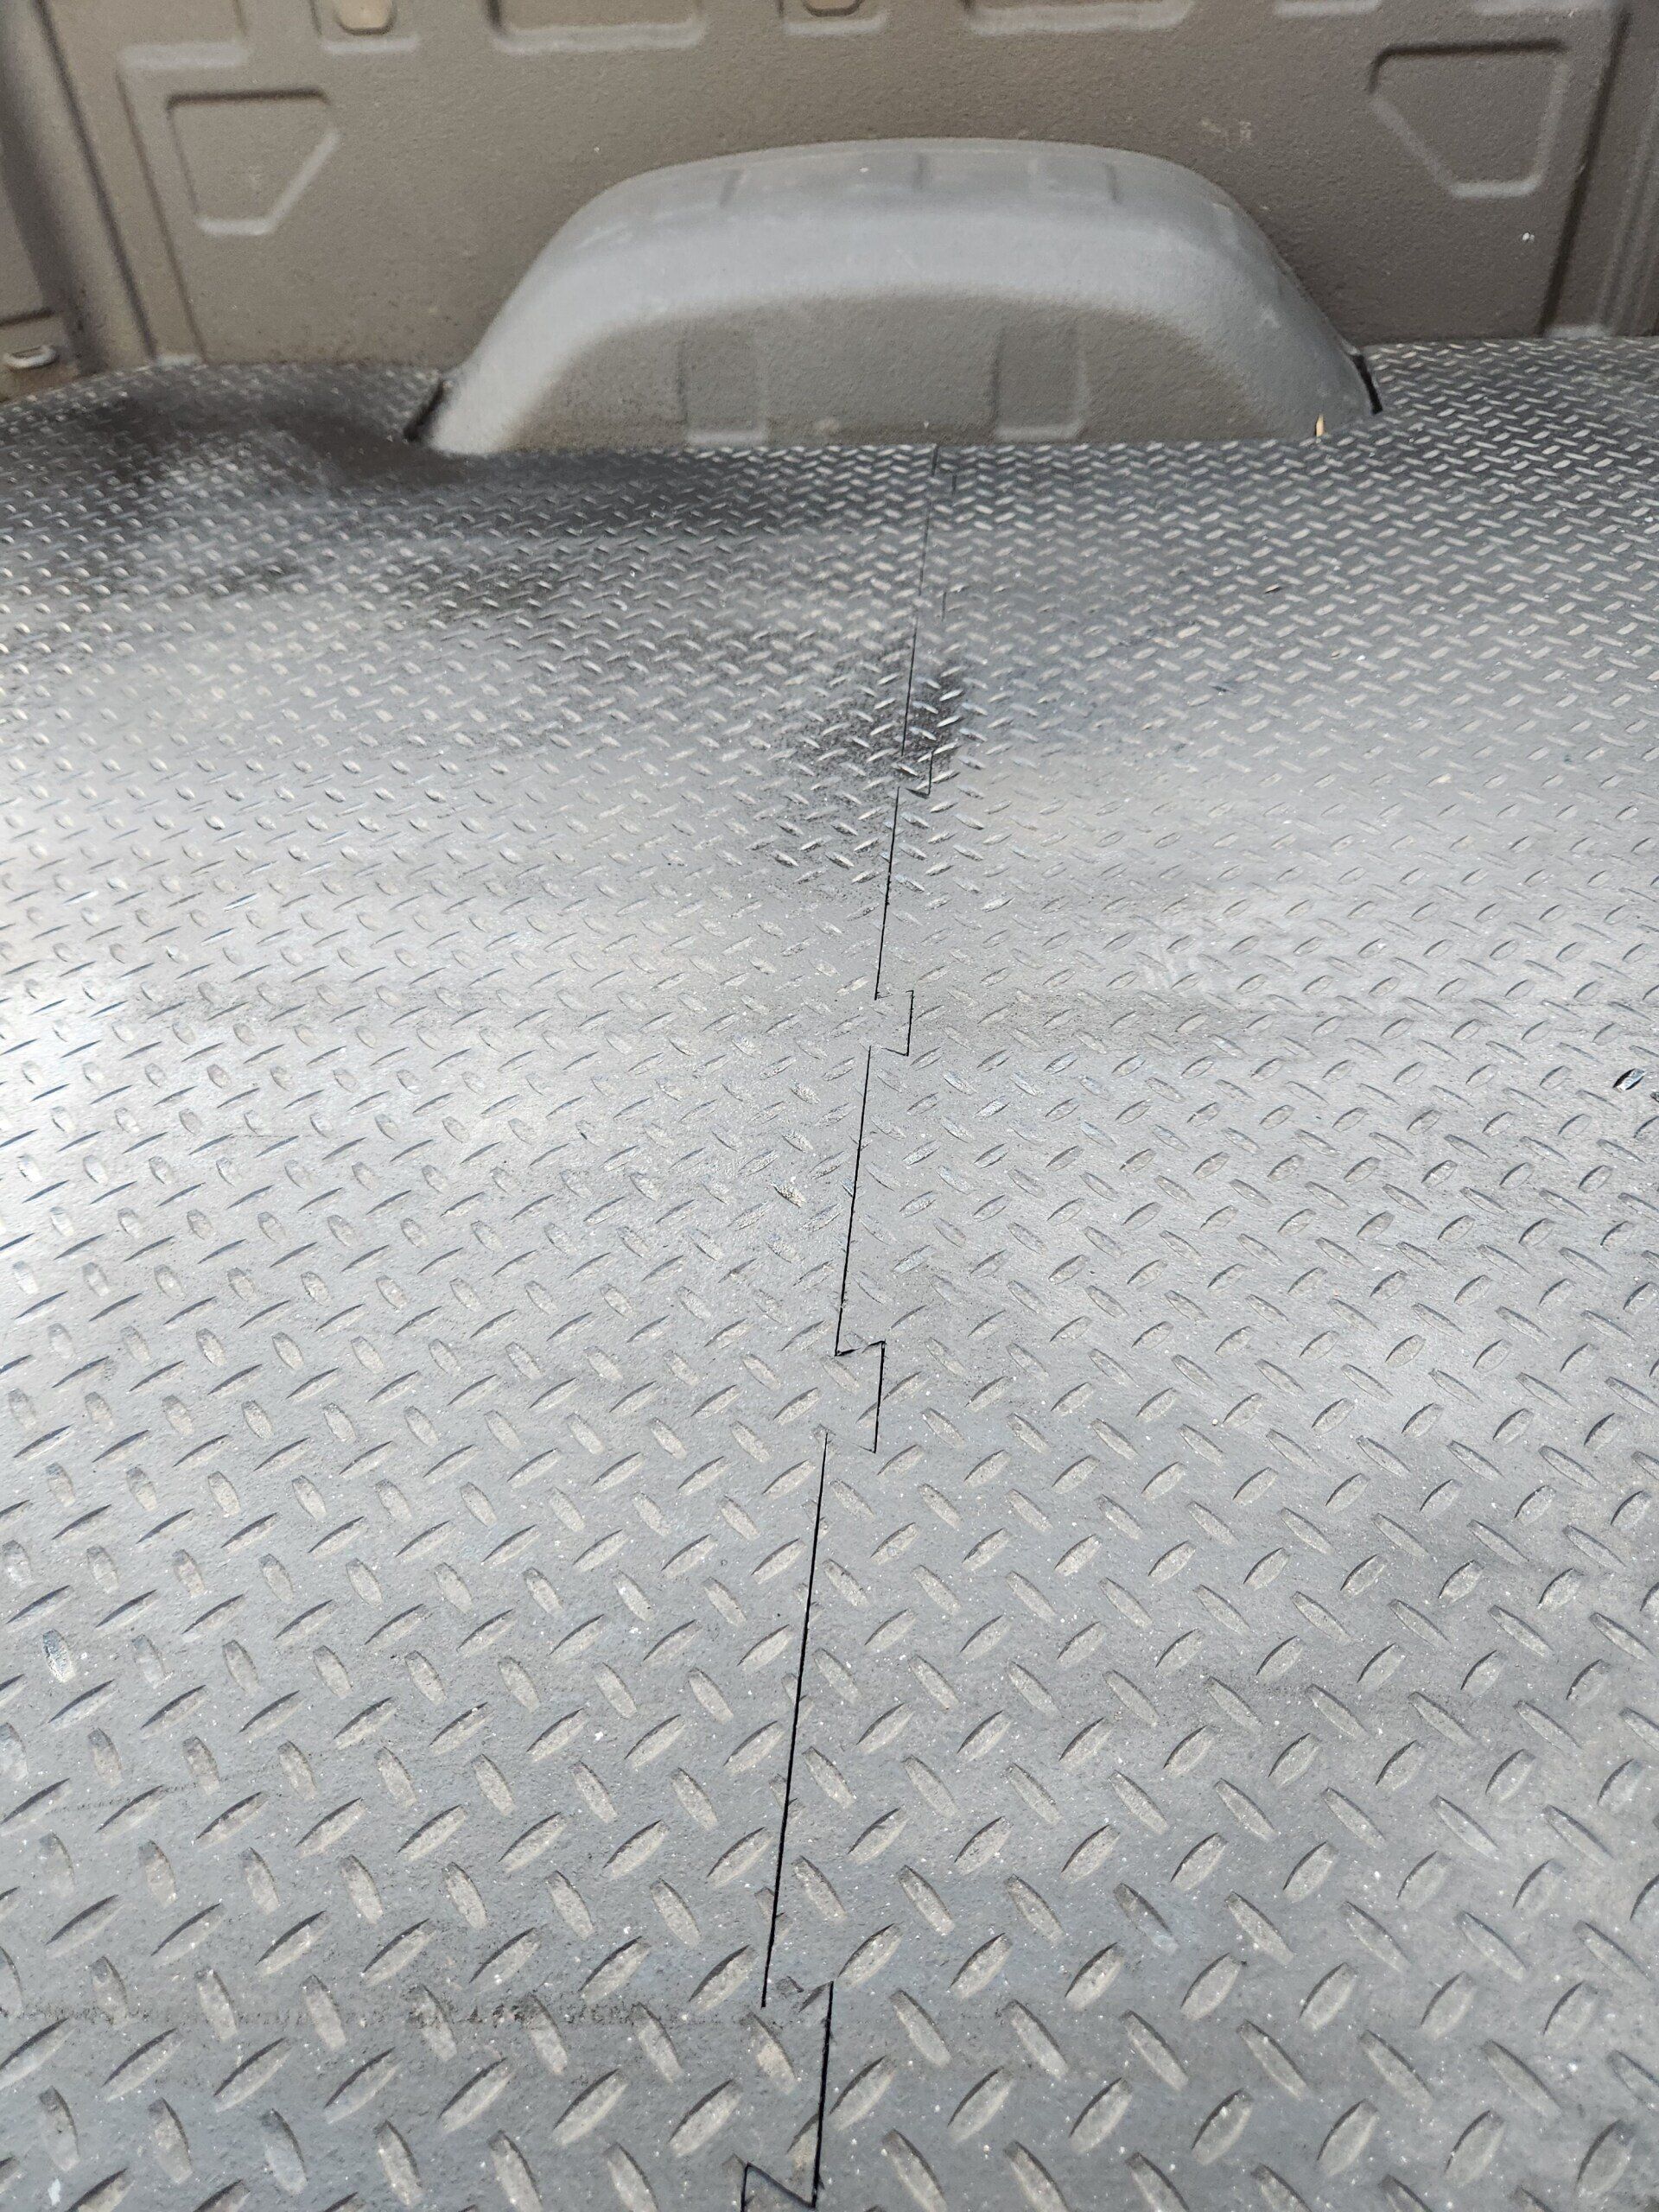 Custom-Cut Truck Bed Mat With Pebbled Surface — Hubbard, OR — Oregon Rubber Mat